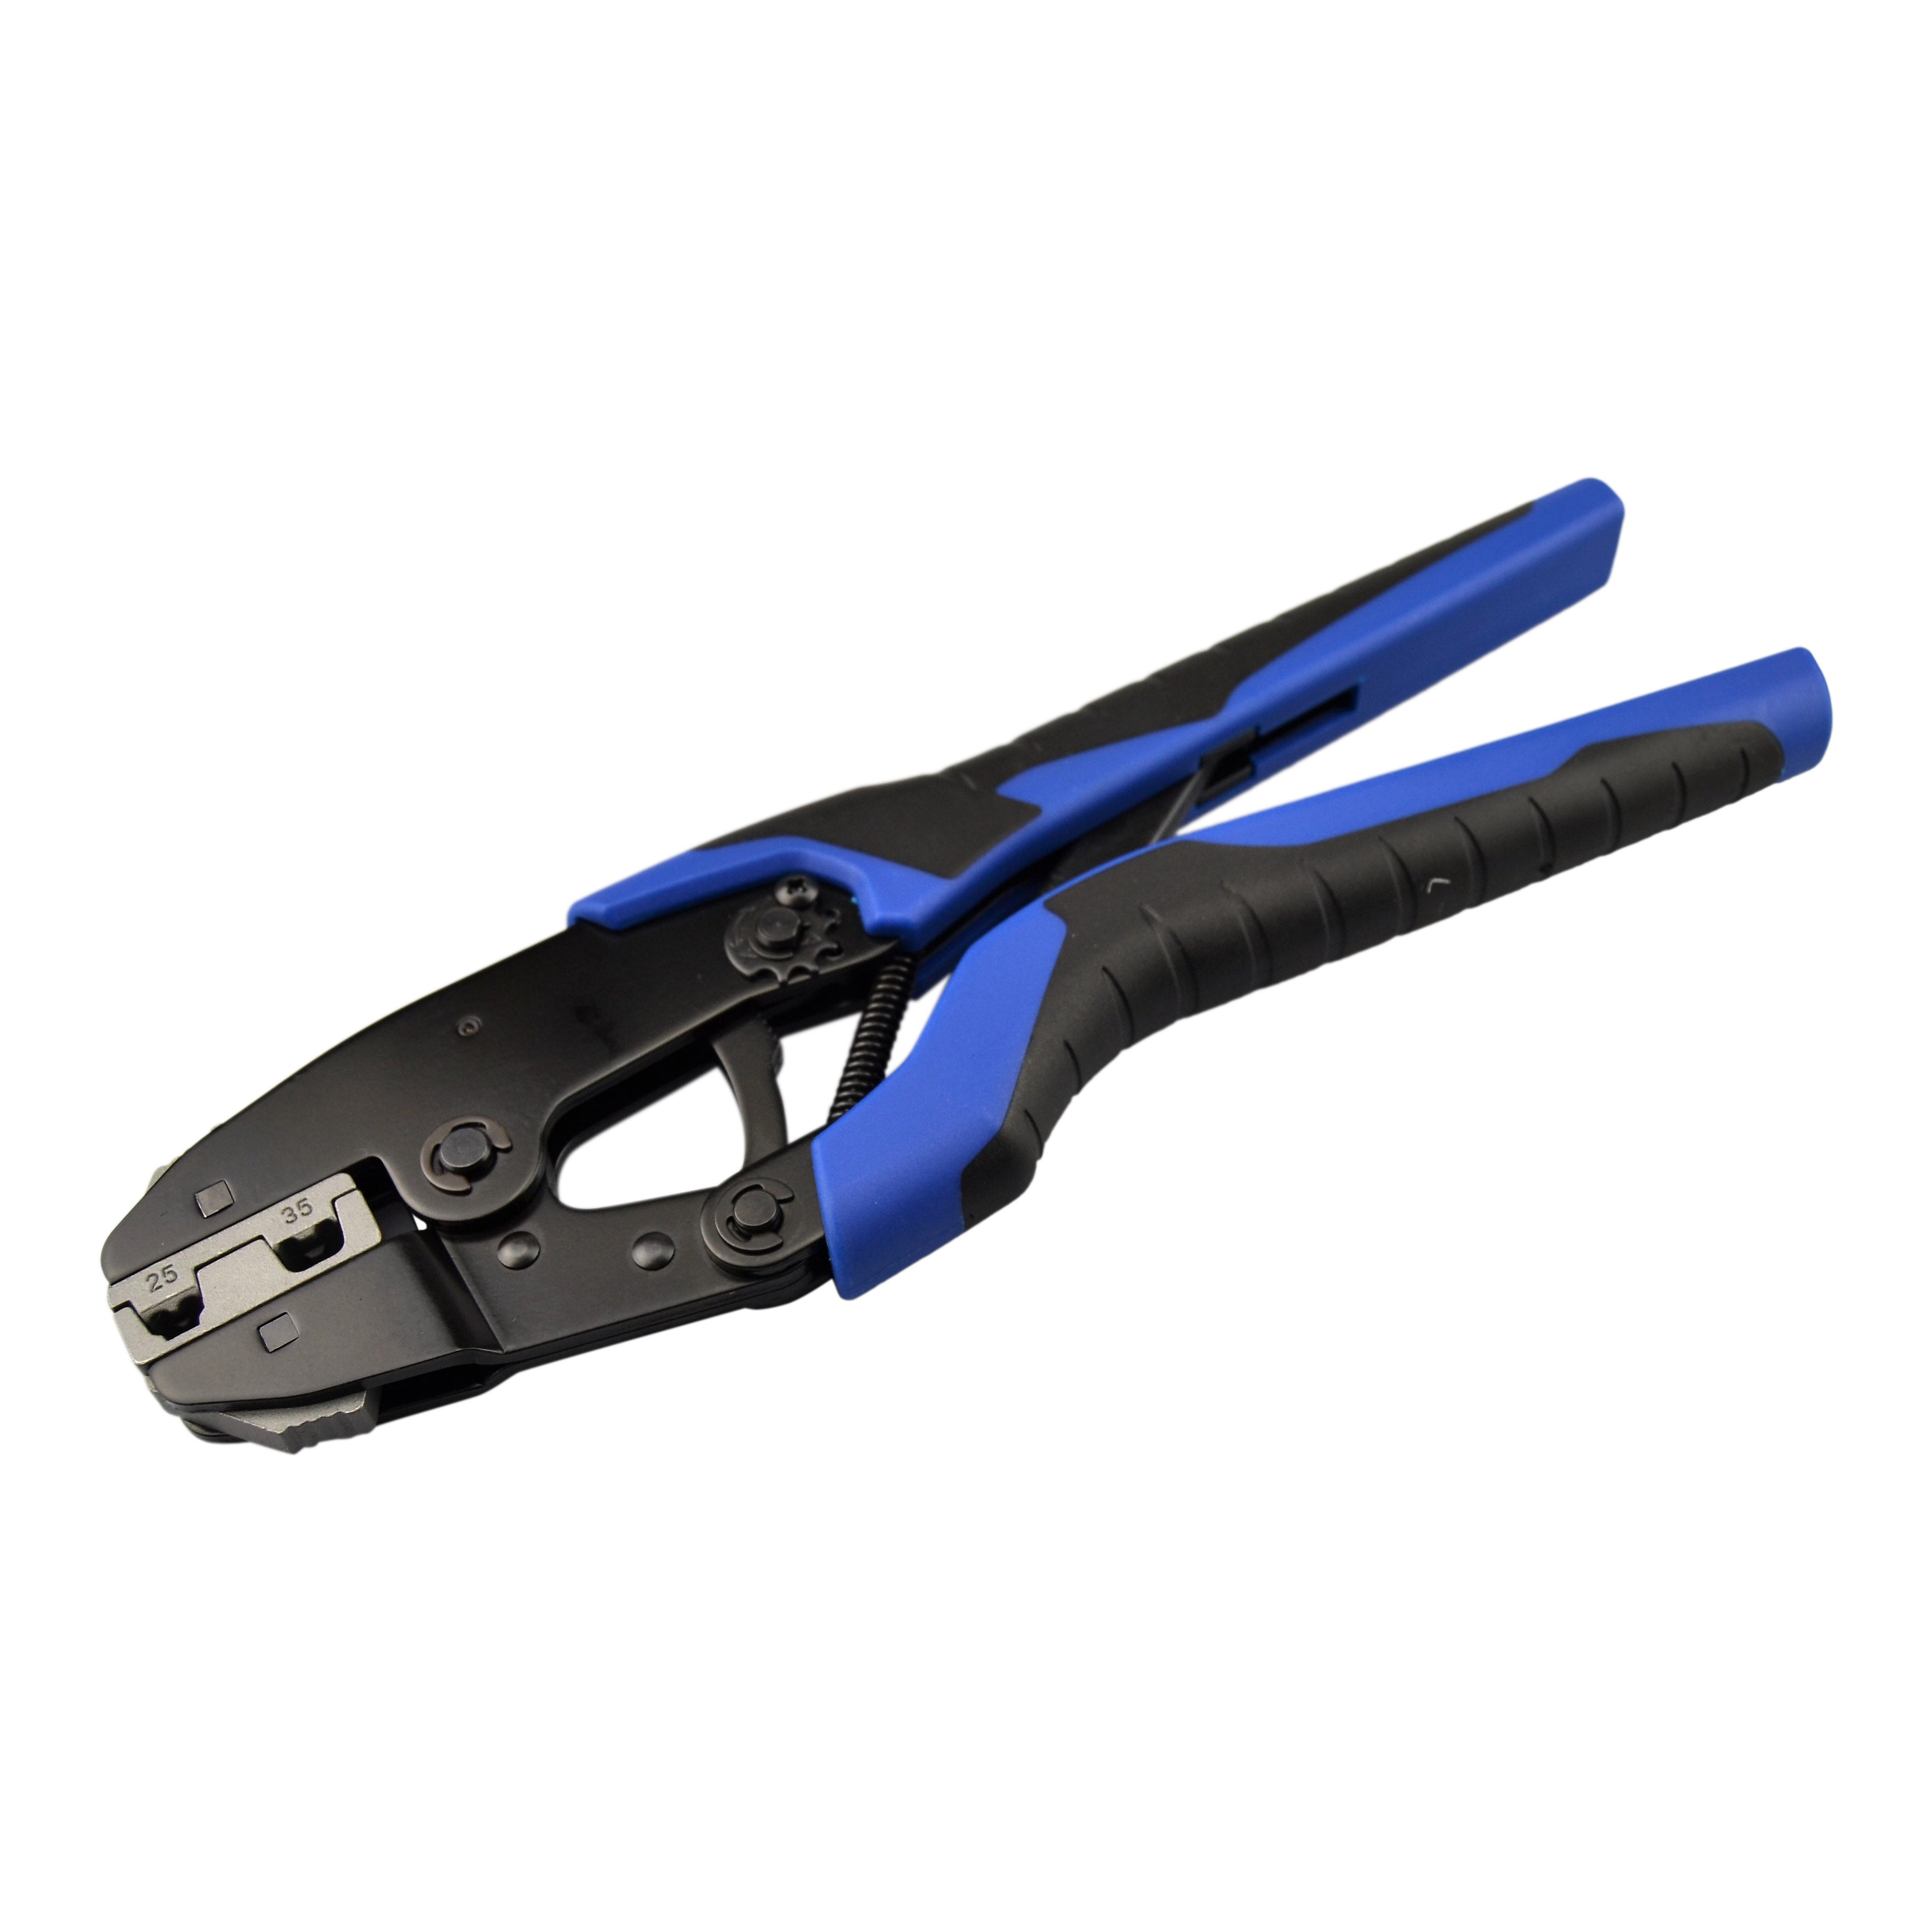 Ratchet Crimping Tool For Single, Dual Entry & Uninsulated Cord End Terminals 25-35mm²